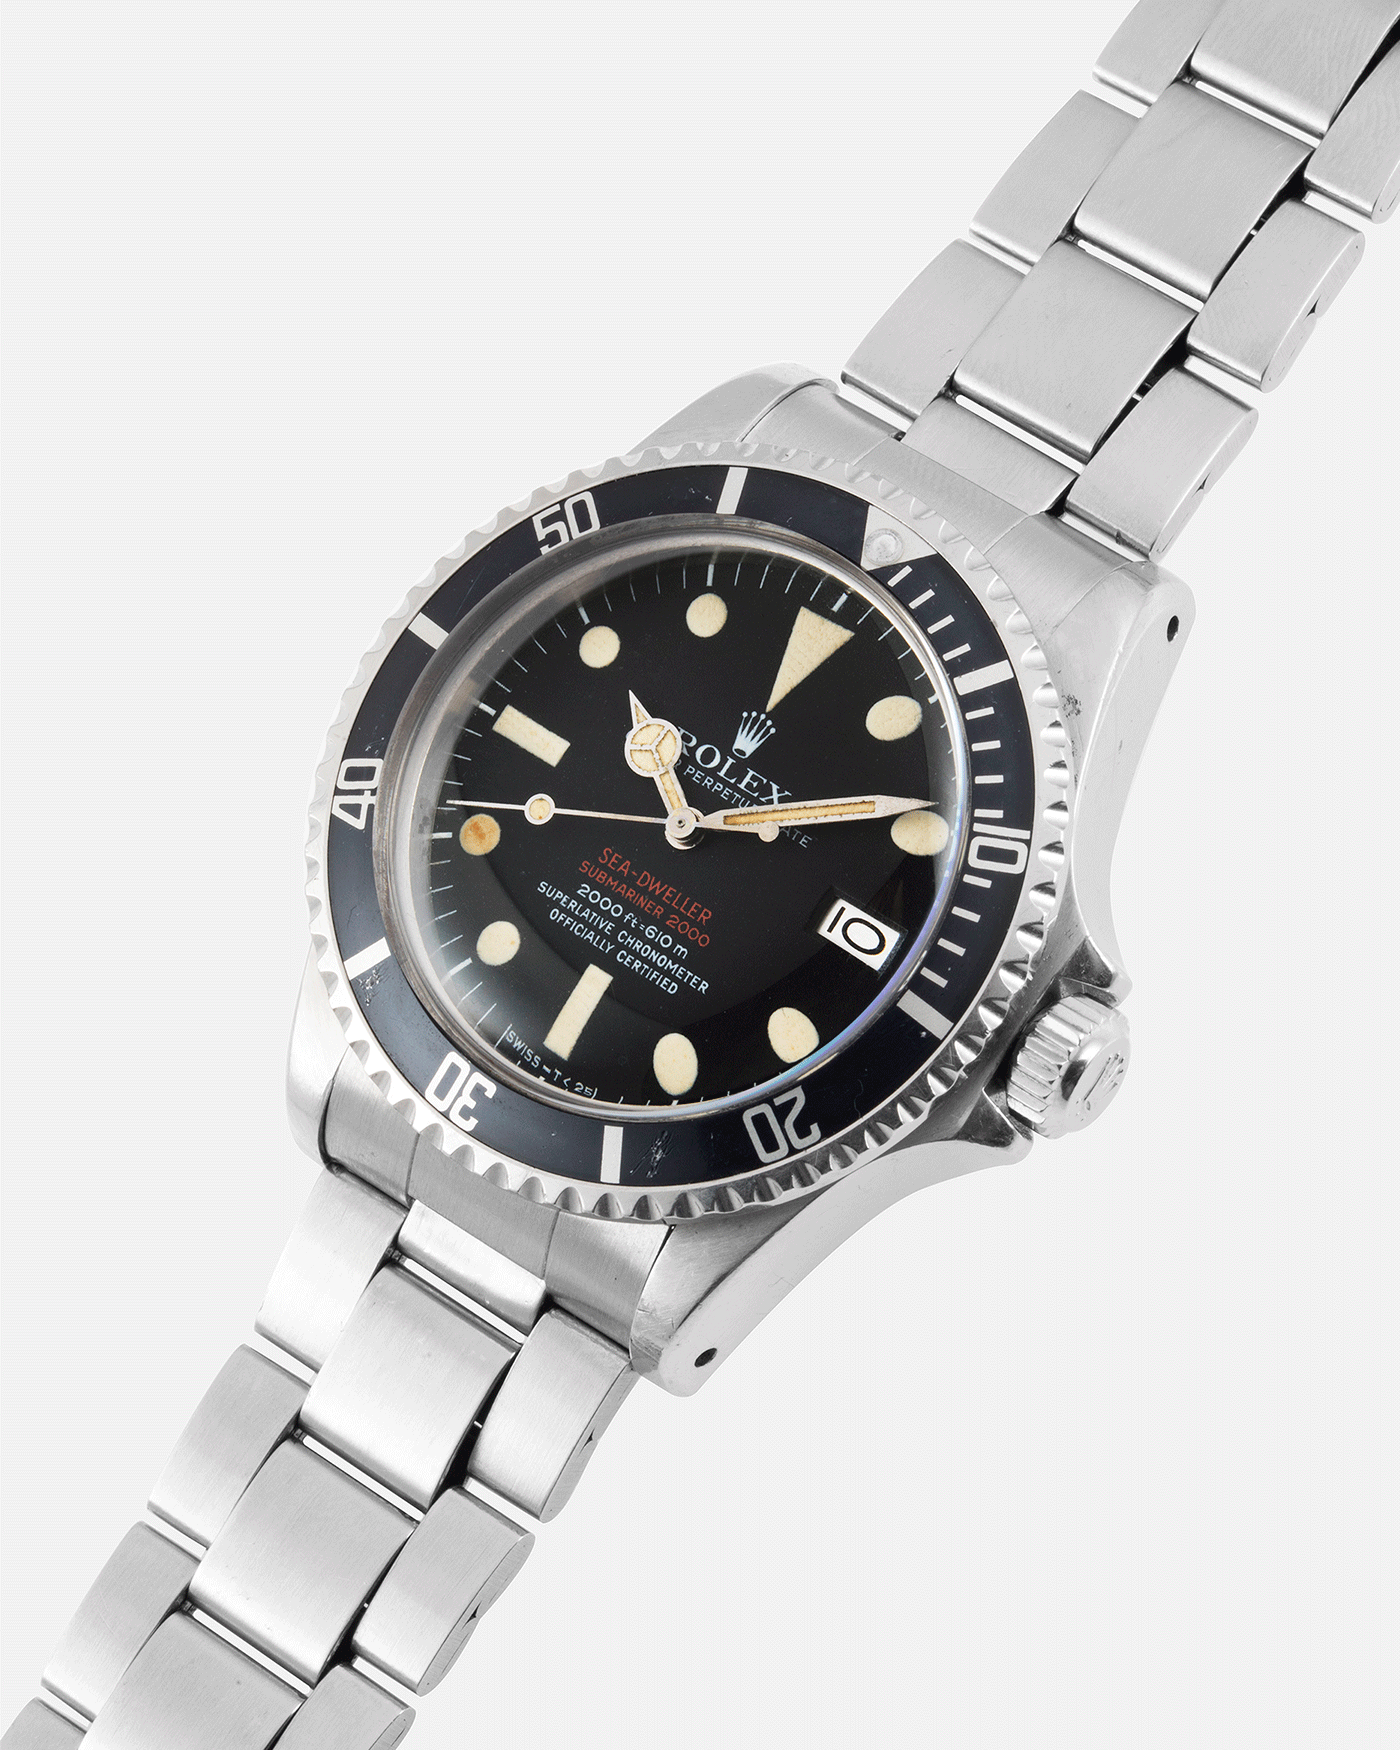 Rolex Double Red Sea Dweller Mk IV Sport Diver Watch | S.Song Vintage Watches For Sale